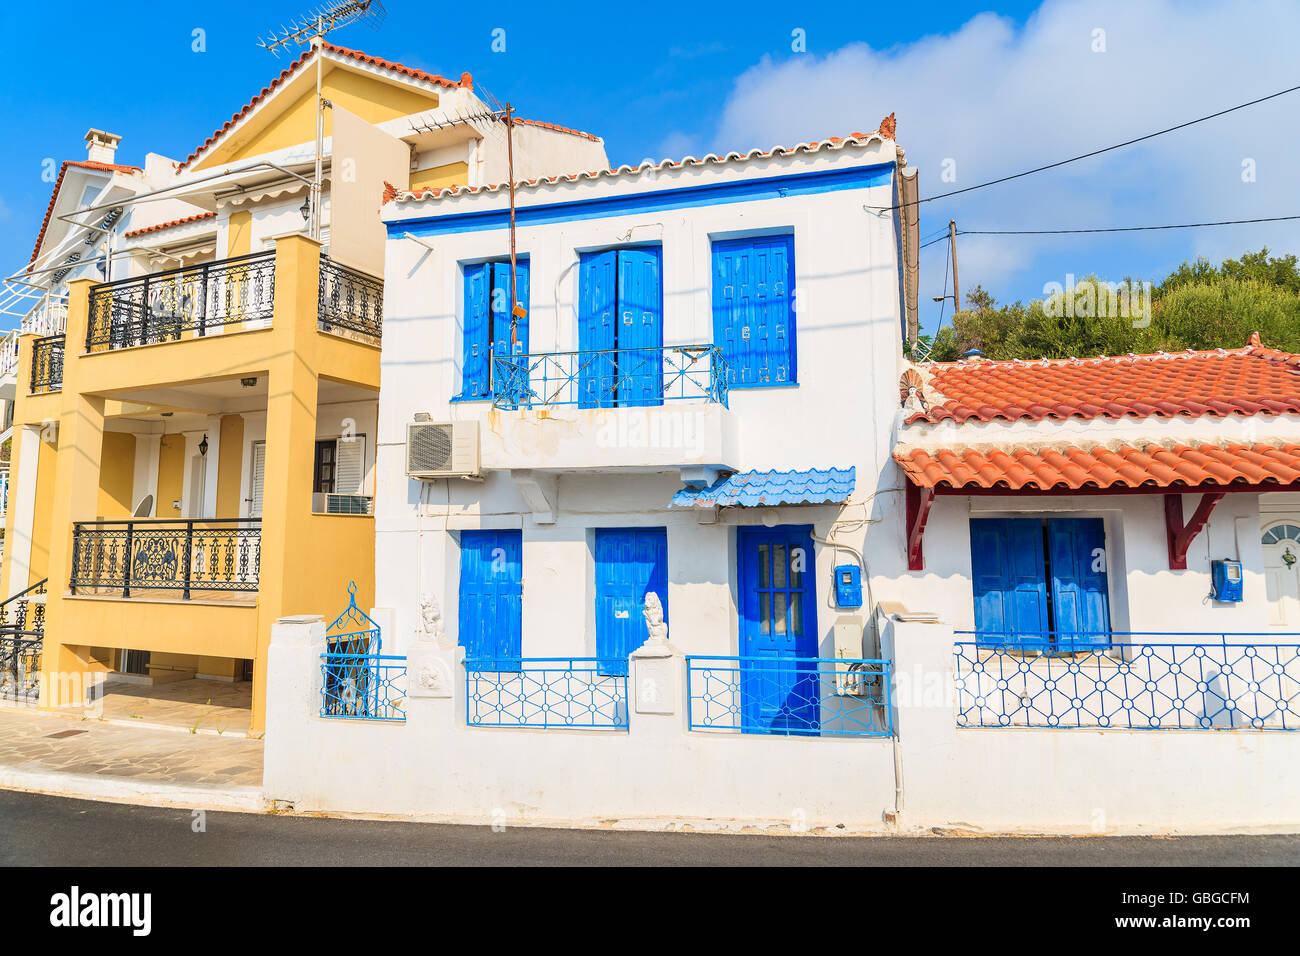 Typical Greek style houses on street of Pythagorion town, Samos island, Greece Stock Photo